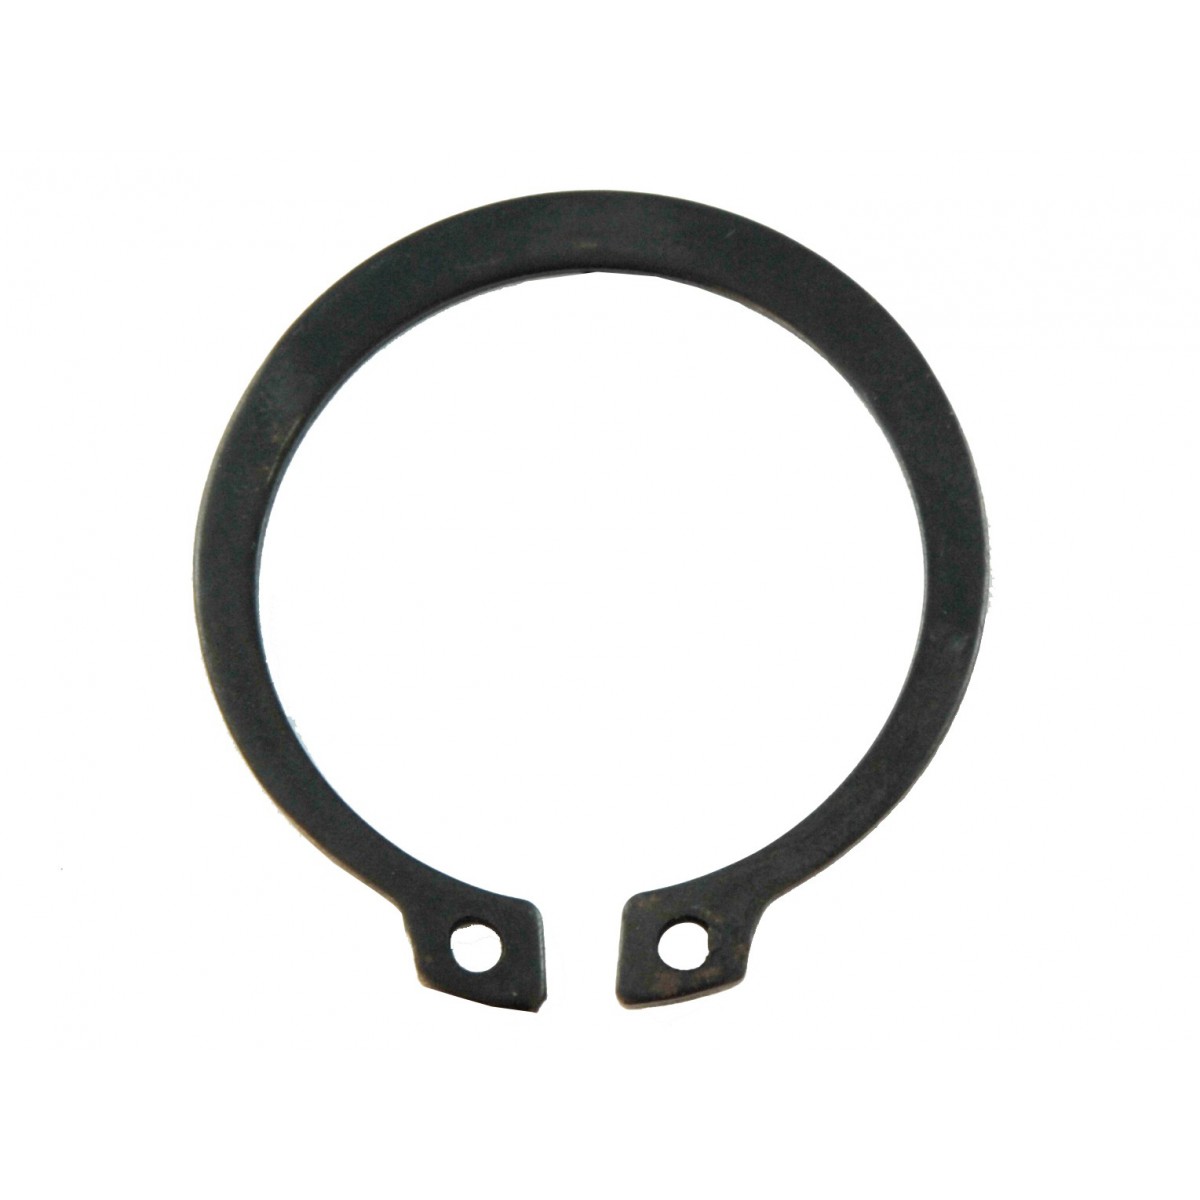 A 38x46 mm securing ring for the SB separating rotor